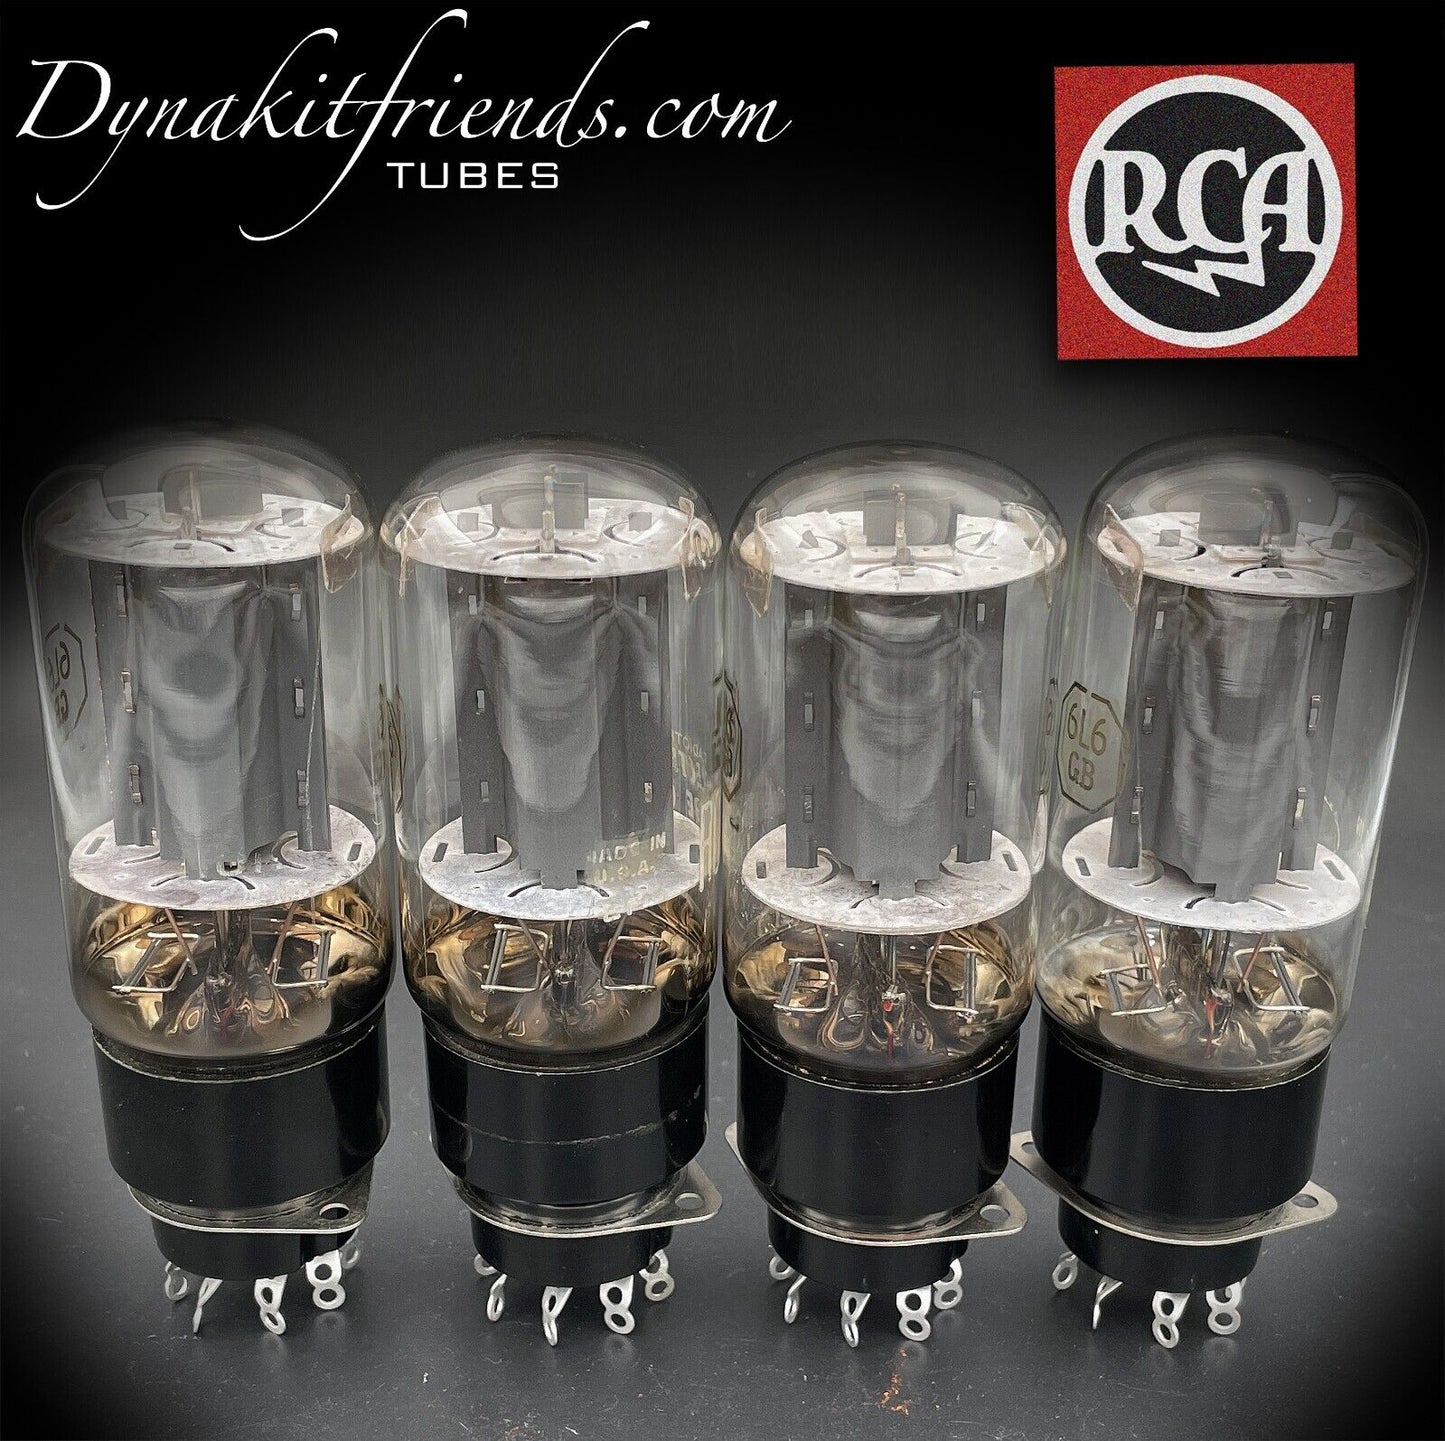 6L6GB RCA Gray Plates Bottom DD Getter Matched Tubes MADE IN USA